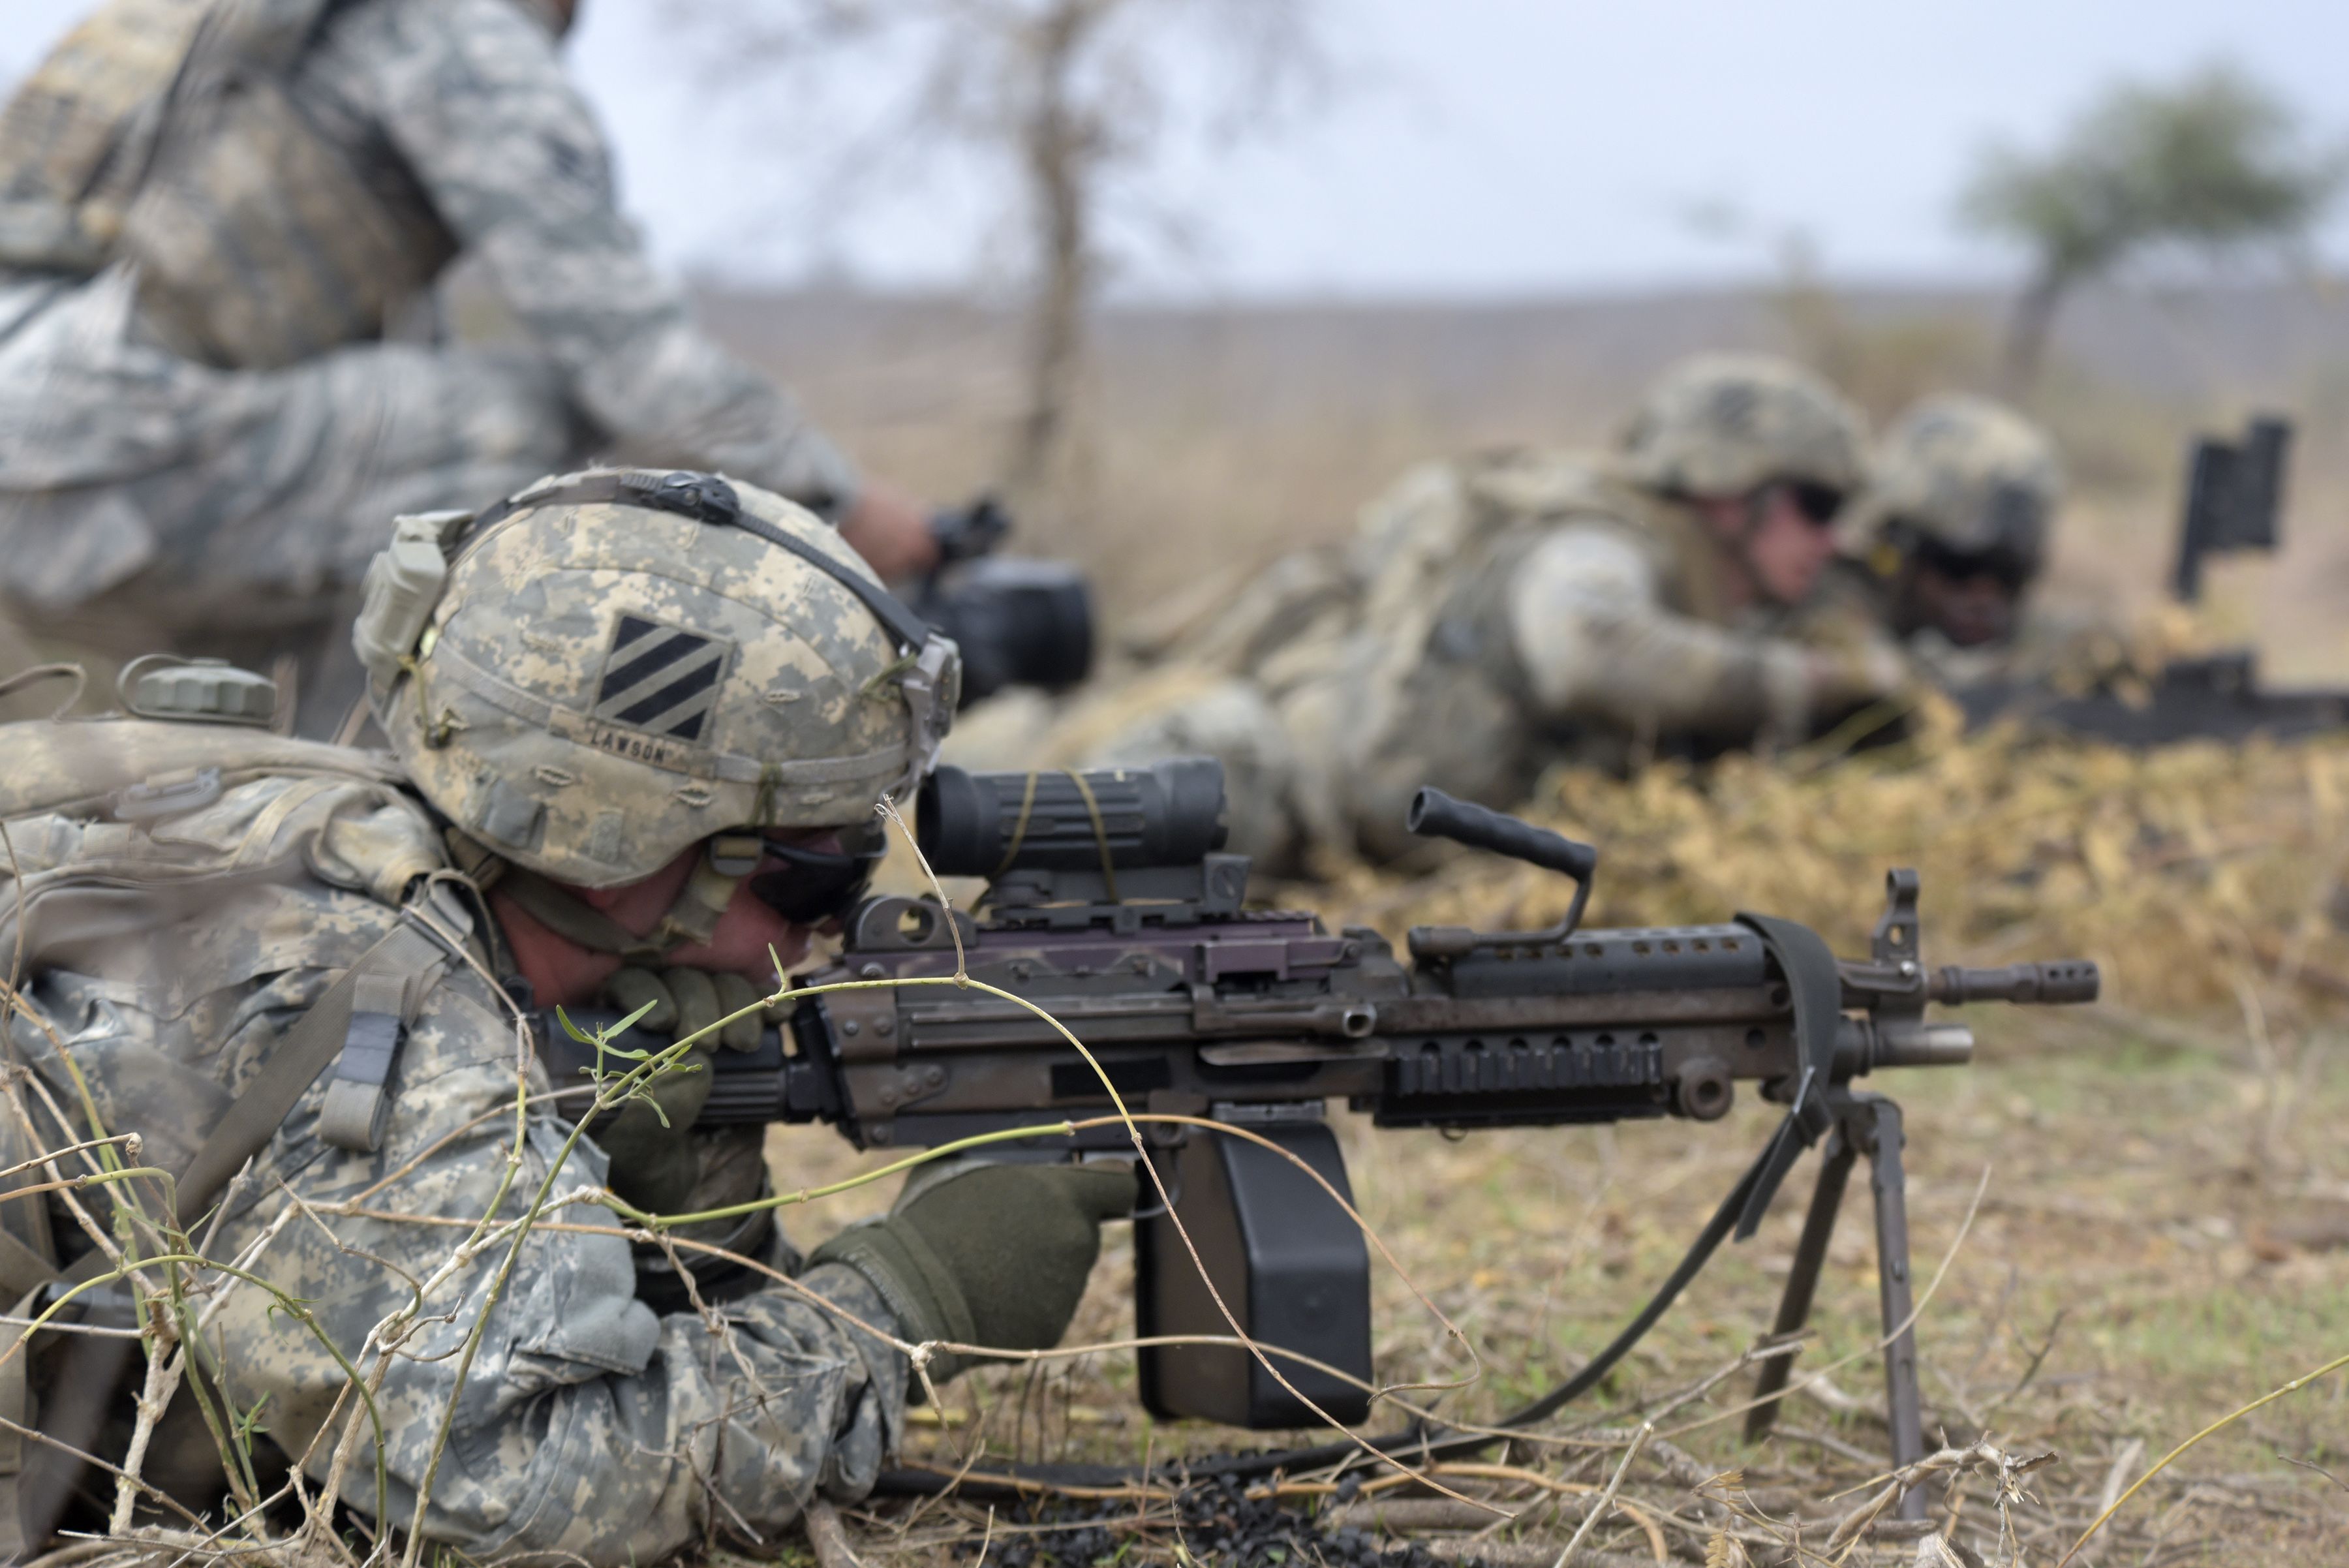 U.S. Army Seeks Biodegradable Bullets to Limit Soil, Water Corrosion